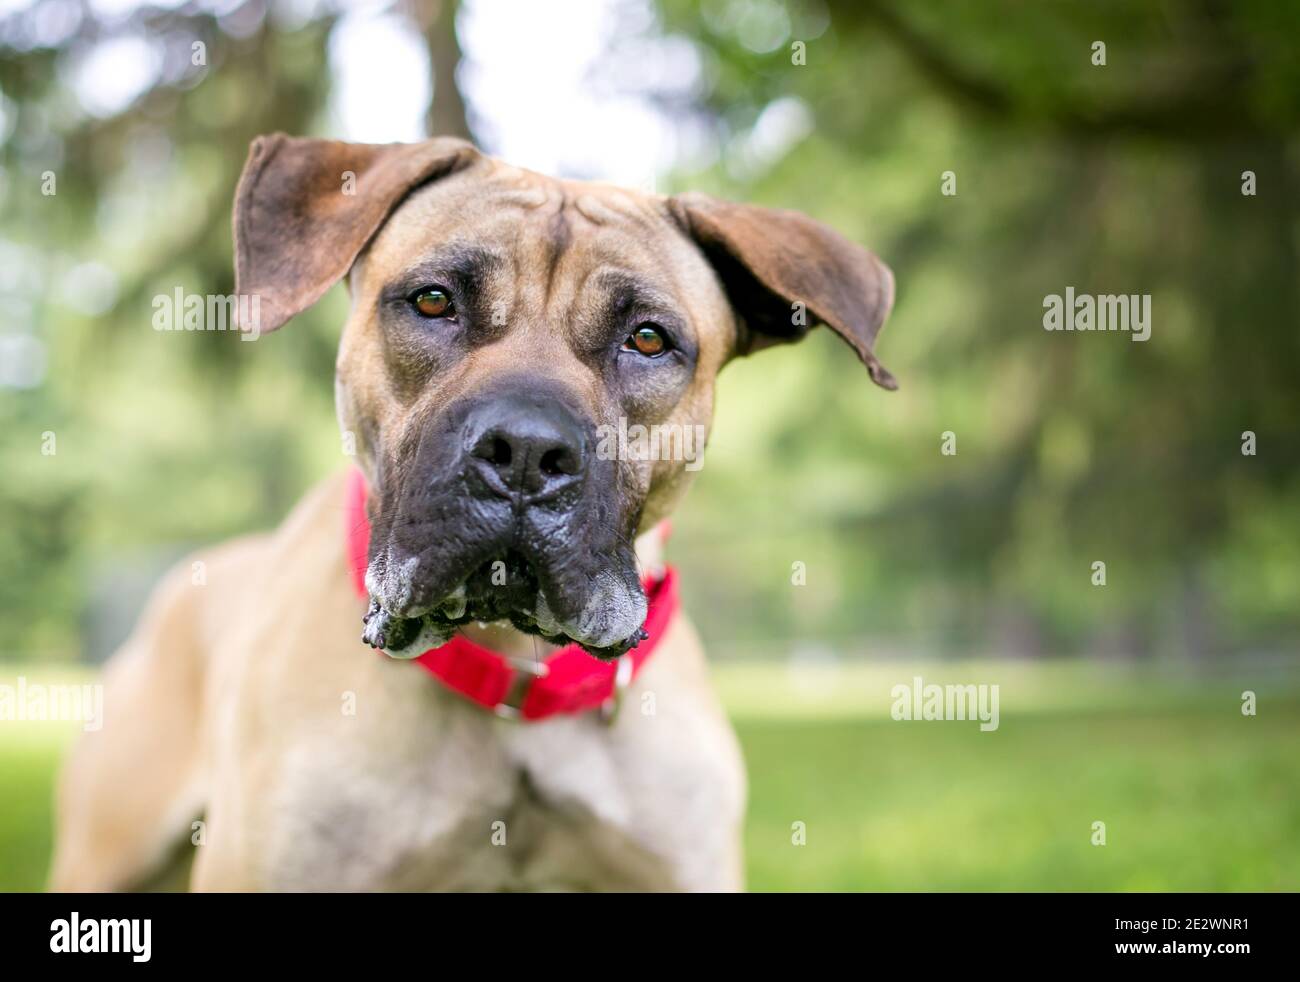 A Great Dane mixed breed dog with large floppy ears wearing a red collar and looking at the camera with a head tilt Stock Photo